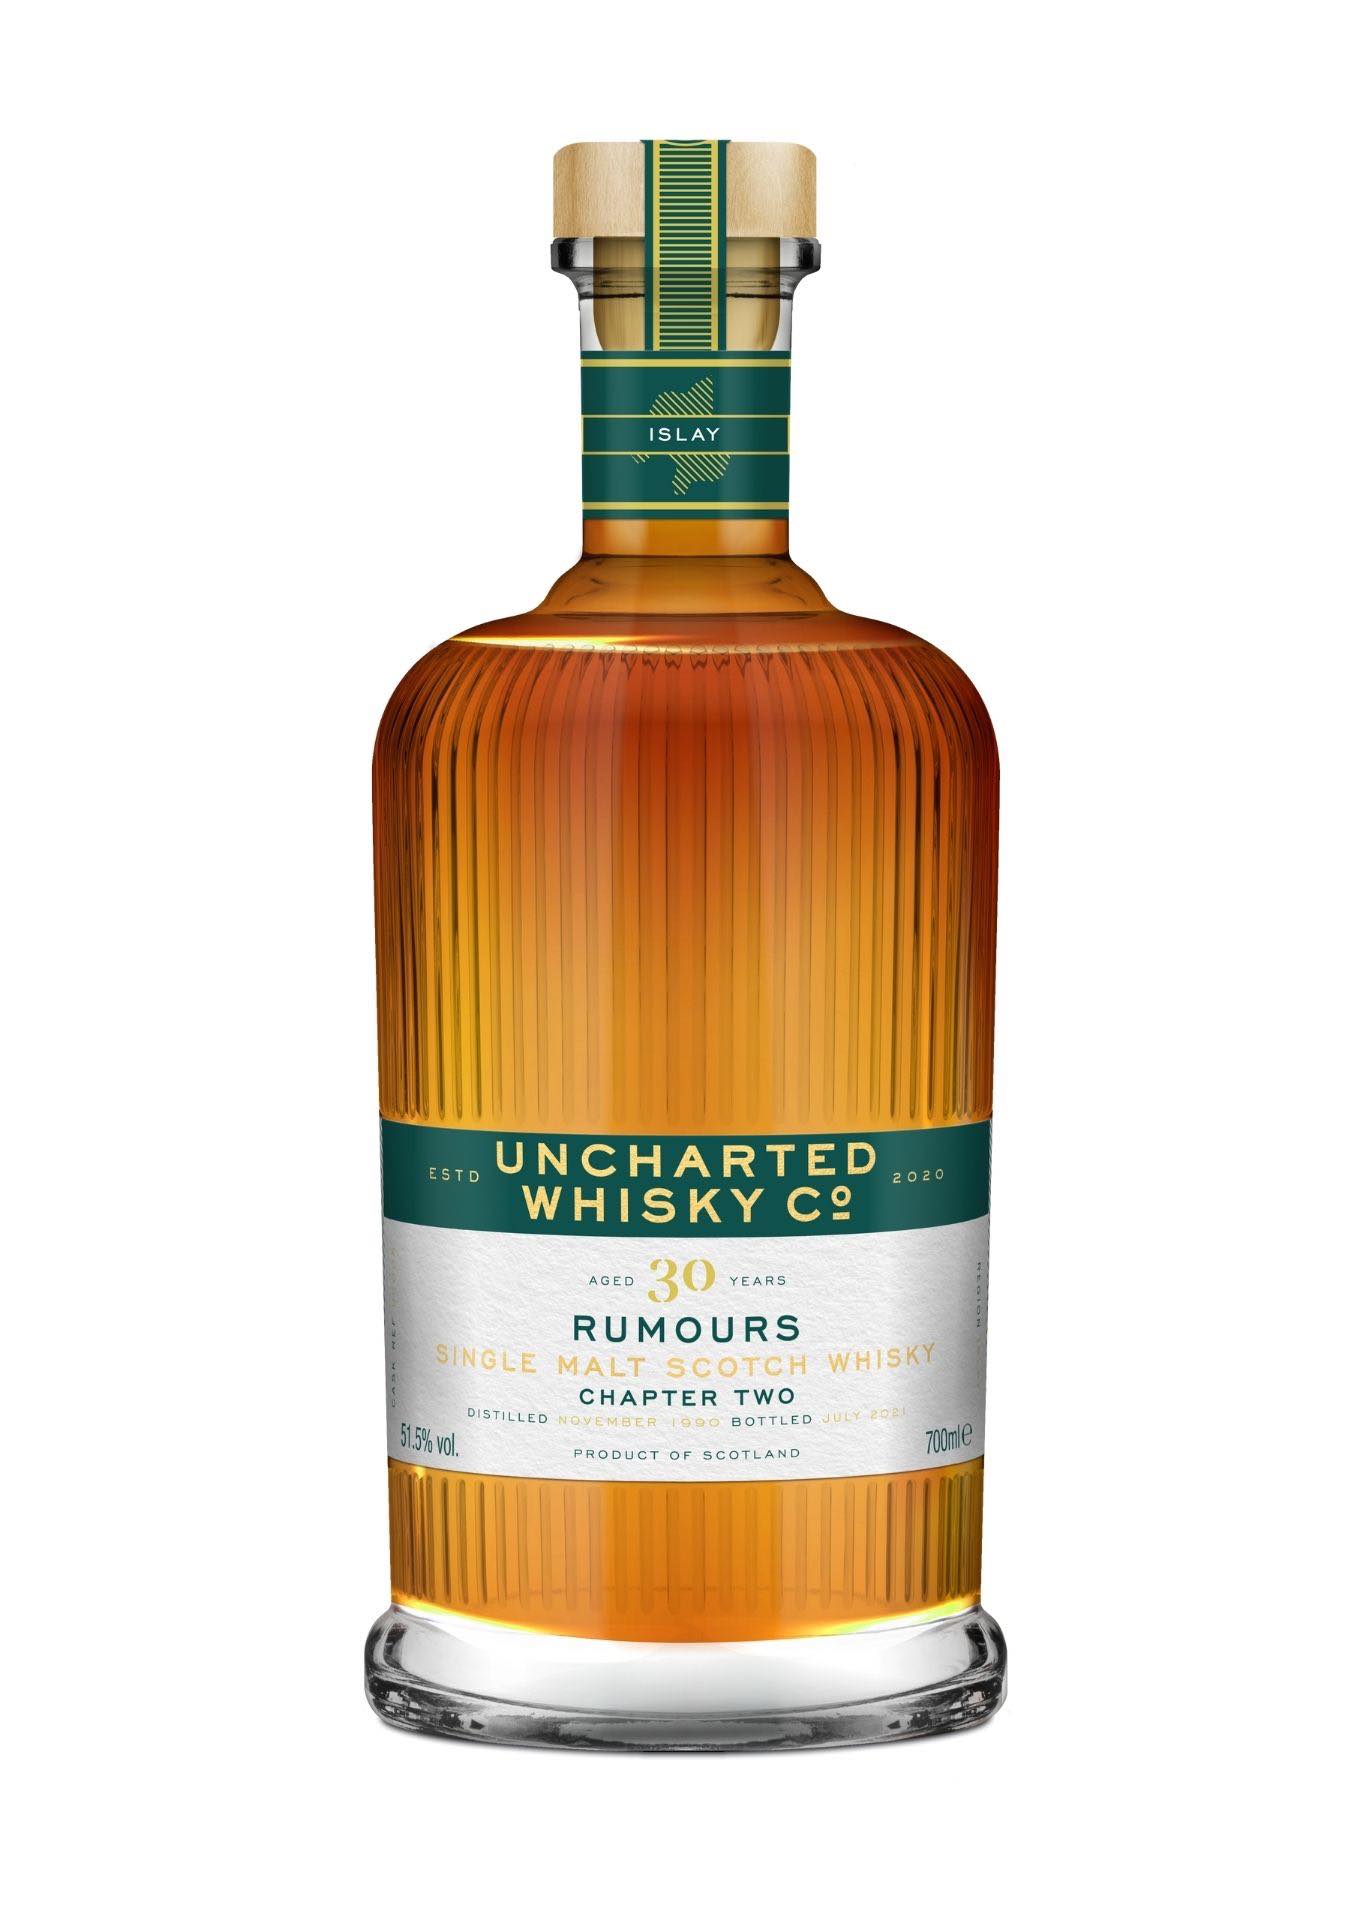 Uncharted Whisky, Rumours Chapter 2, Secret Islay 30 Year Old